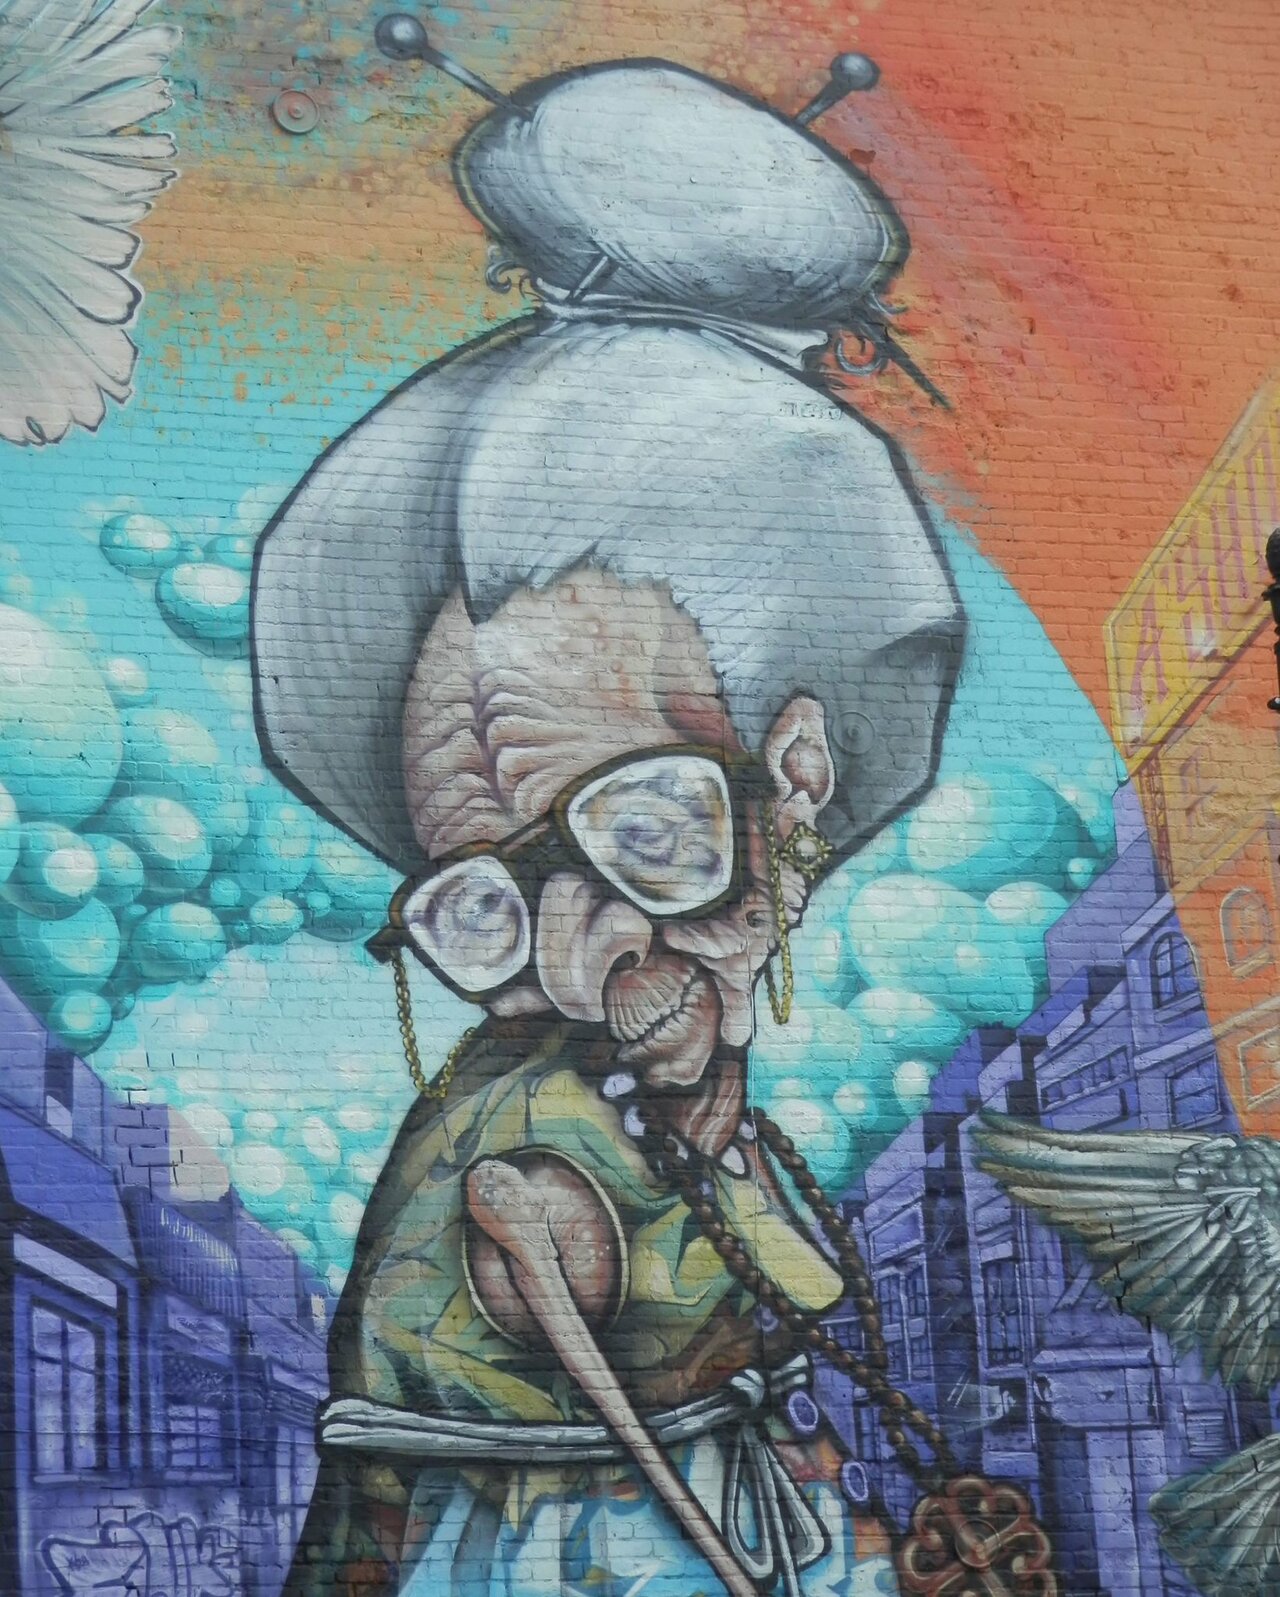 #StreetartSaturday #Montreal #Streetart by ASHOP Crew. A bit of the old lady detail. I have a LOT MORE MATERIAL! https://t.co/SMMgFQ5ftD